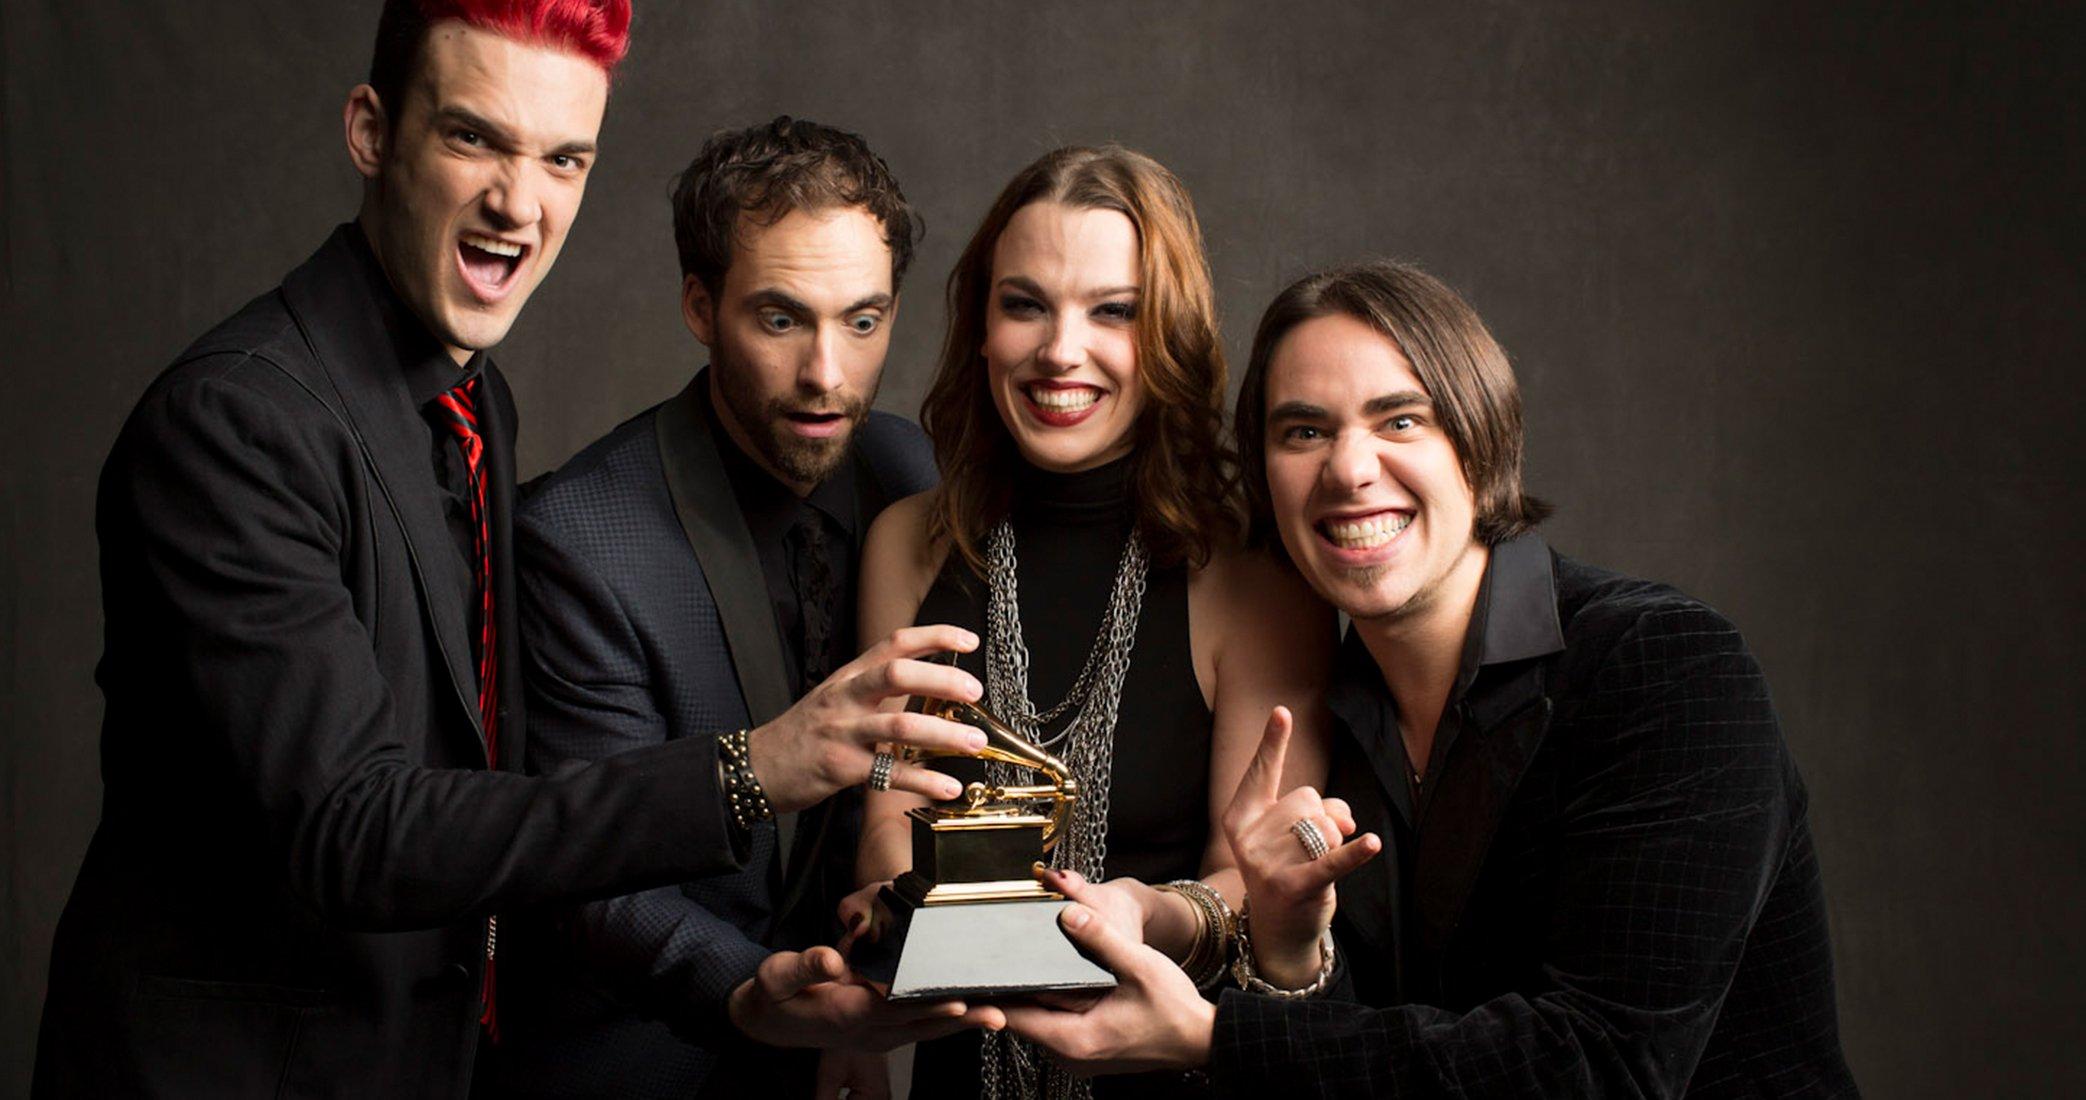 Where Does Lzzy Hale Keep Her GRAMMY?